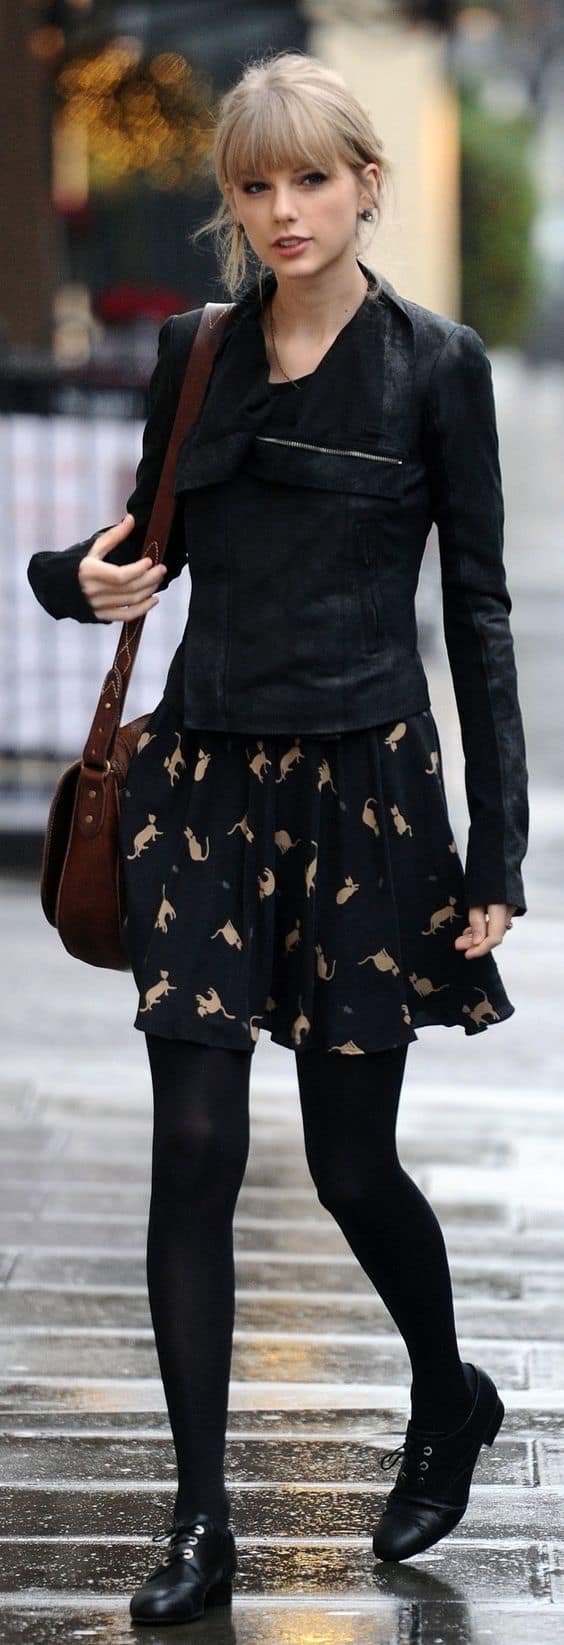 how to wear black oxford shoes and skirt